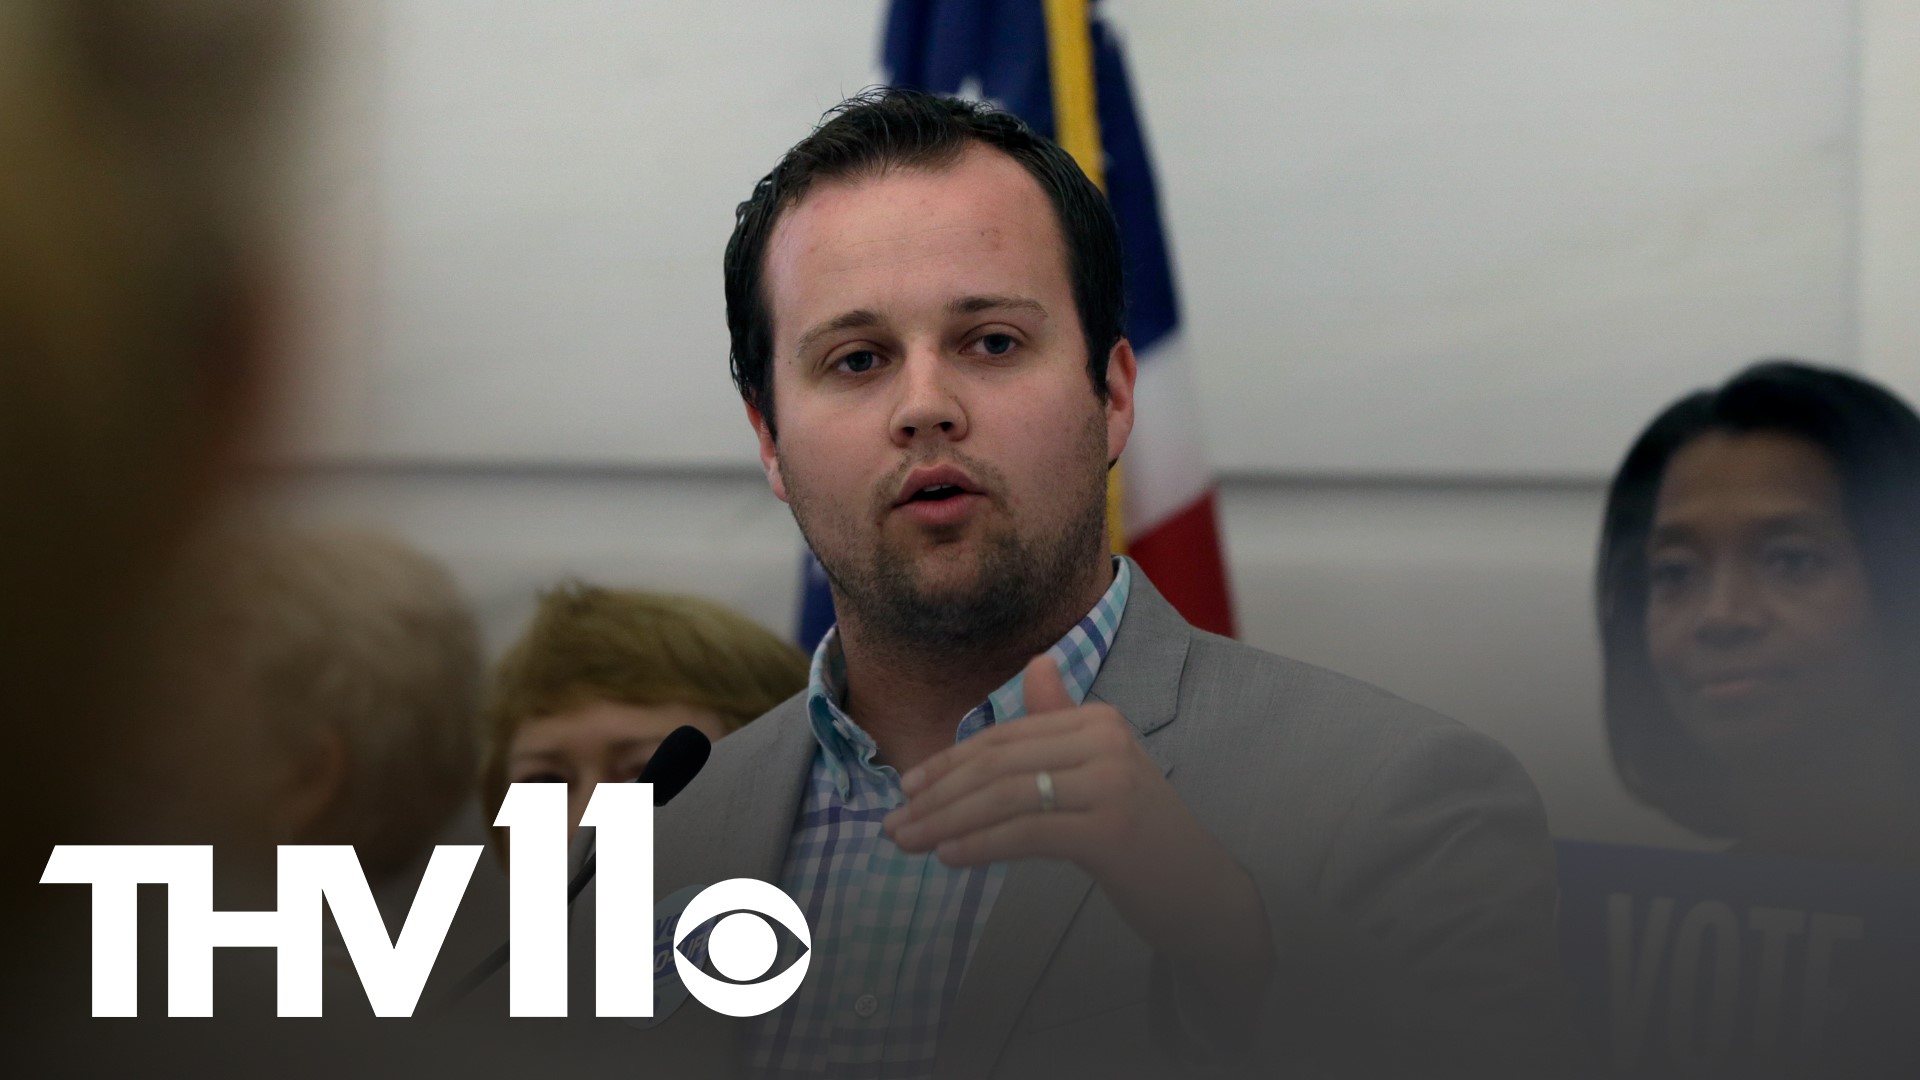 All eyes are on Fayetteville this week as the trial of Josh Duggar gets underway.